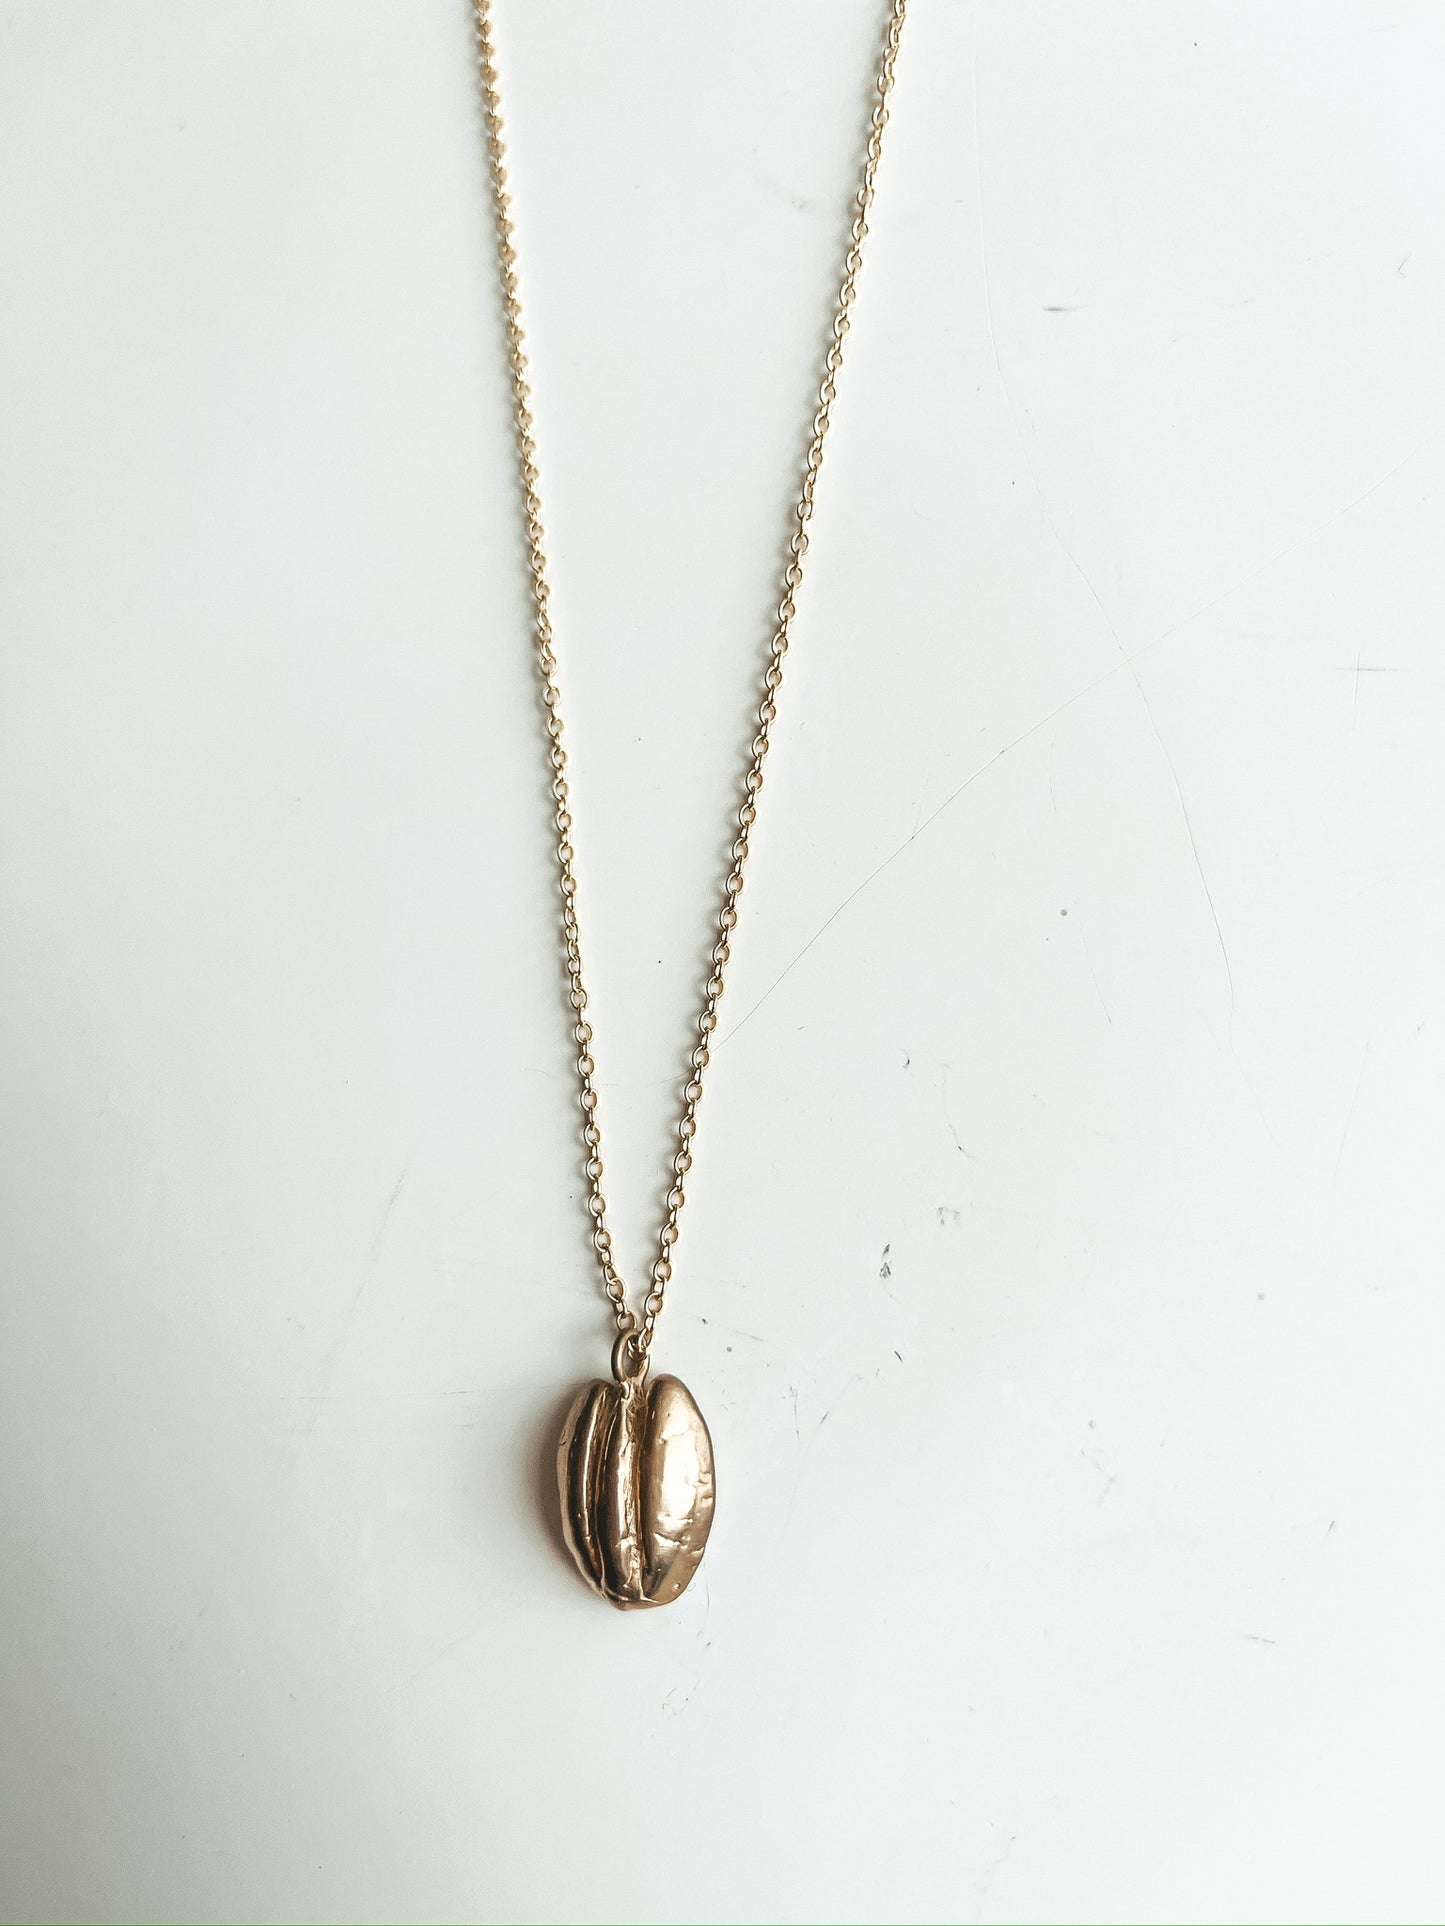 Mimosa Handcrafted Pecan Pendant Necklace